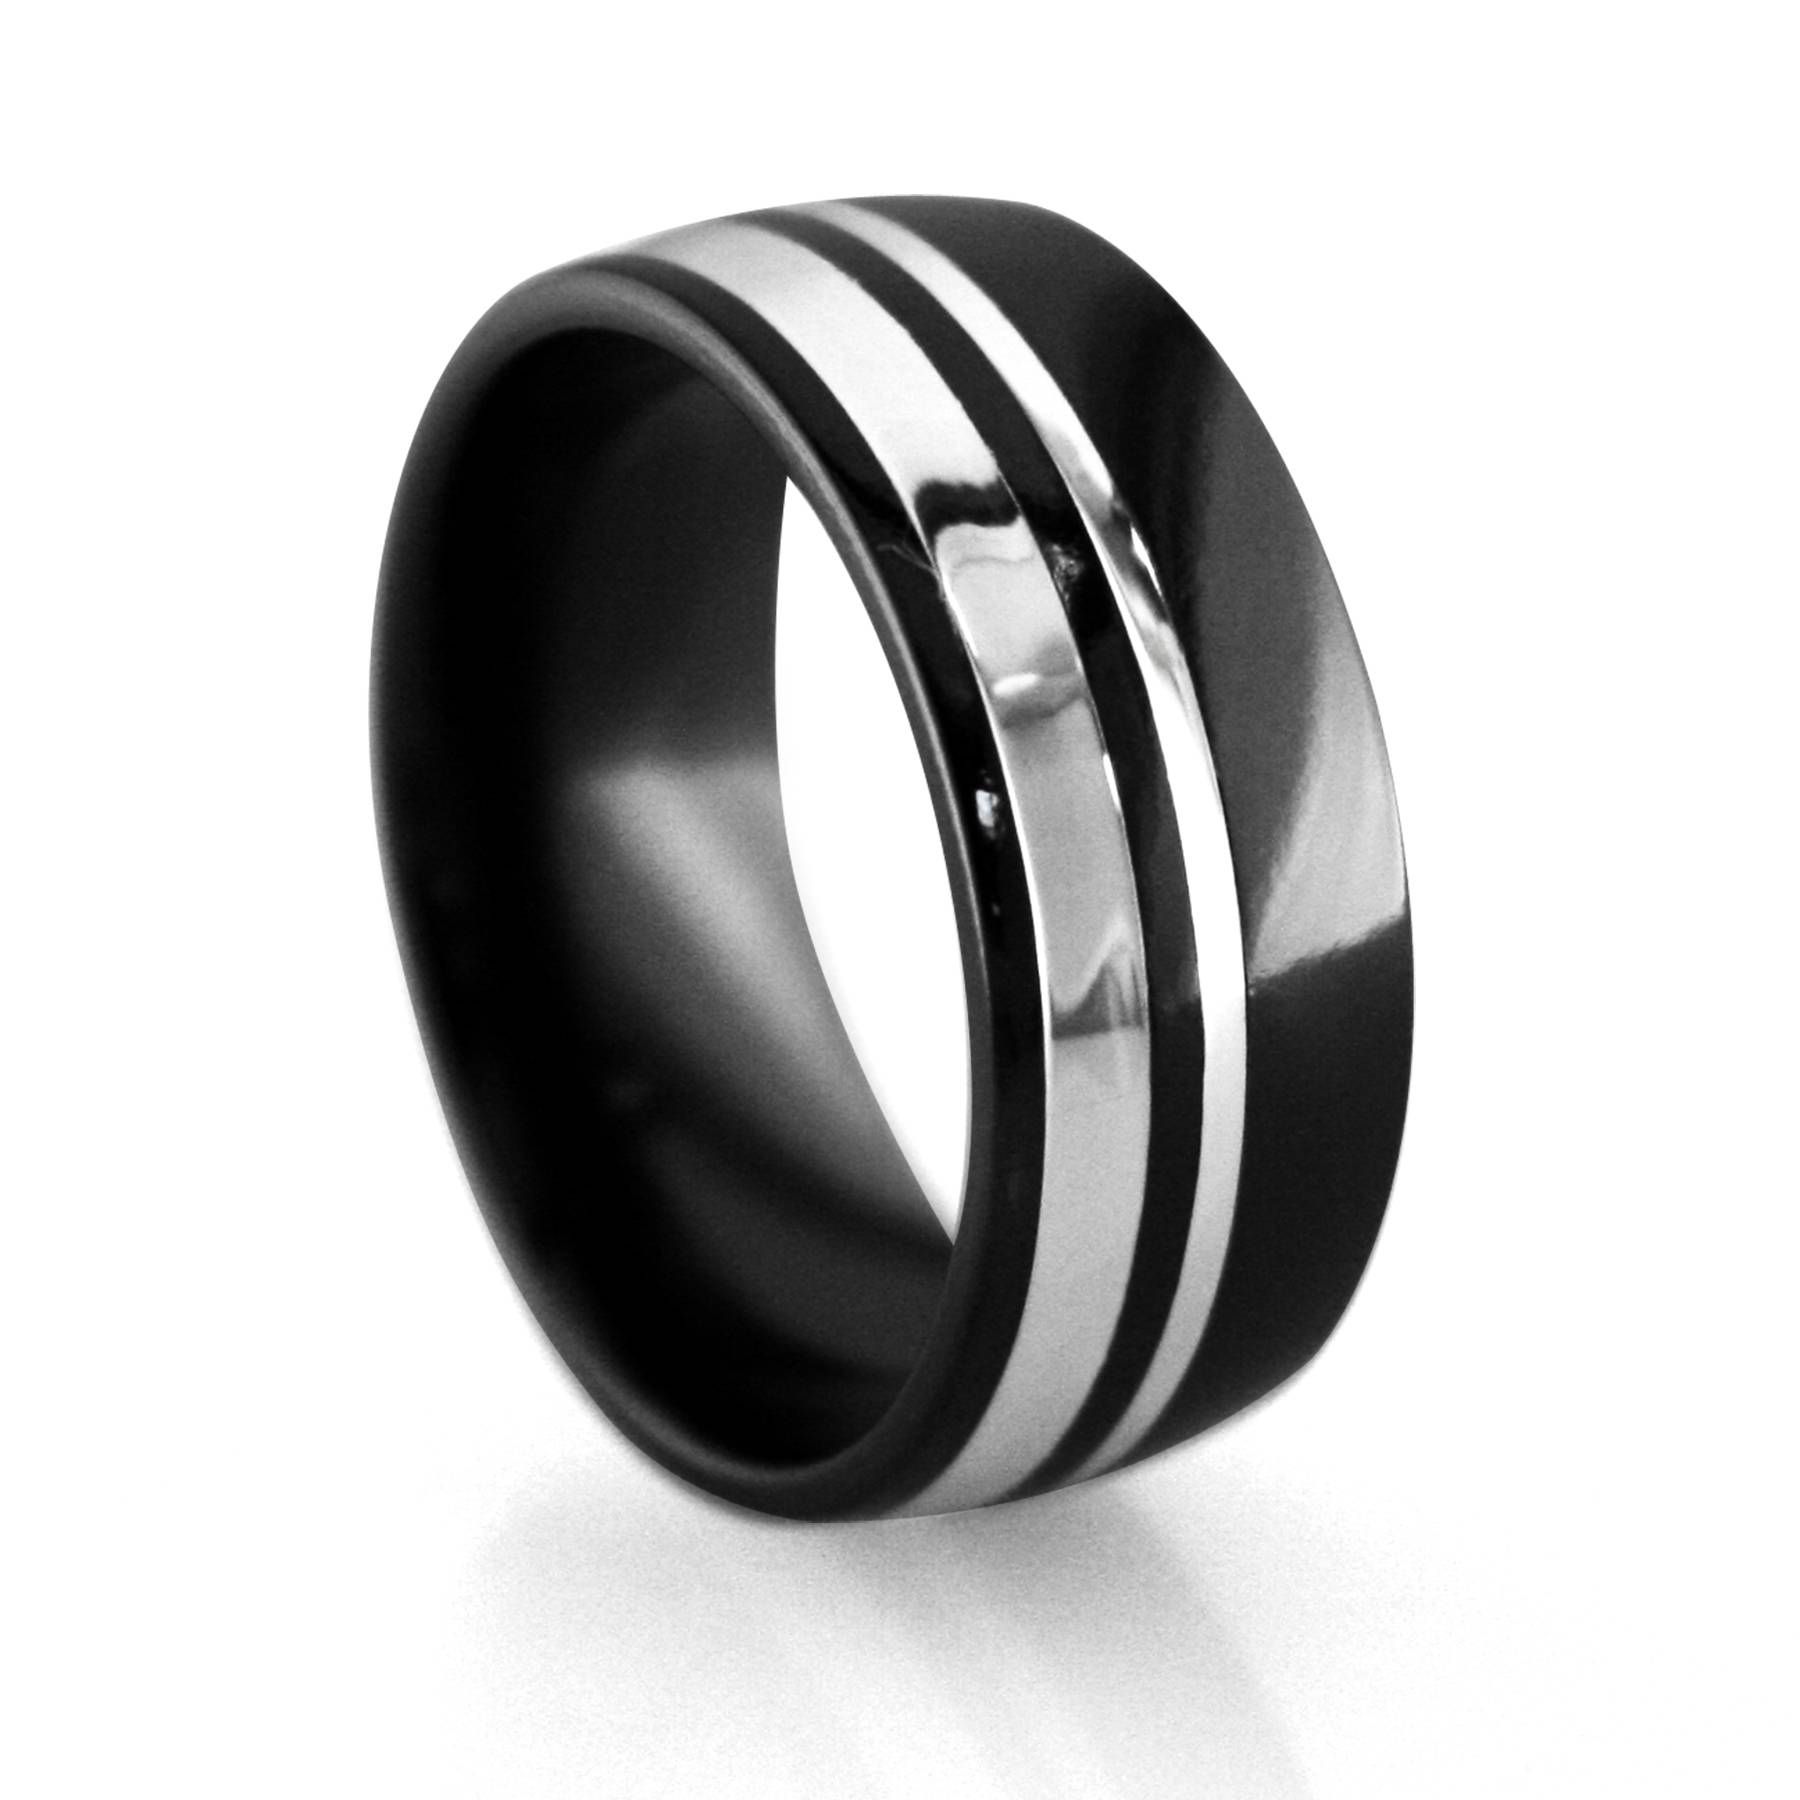 Black Gold Mens Wedding Rings Tags : Tungsten Mens Wedding Rings Regarding Black Metal Wedding Bands (View 15 of 15)